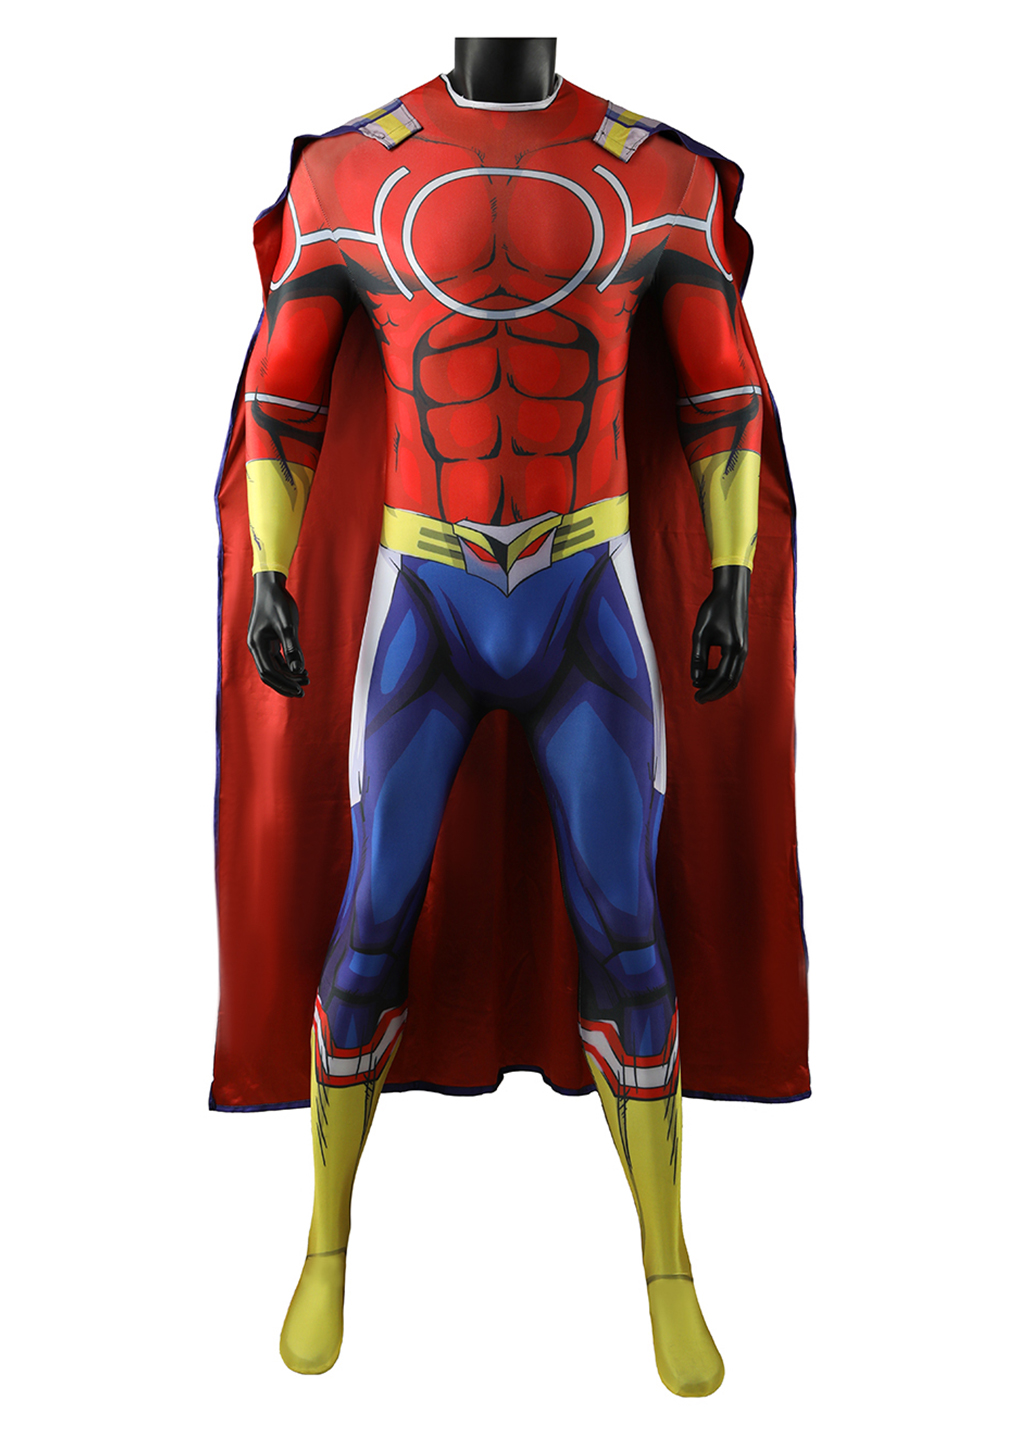 All Might Costume My Hero Academia Bodysuit Cosplay for Adult Kids